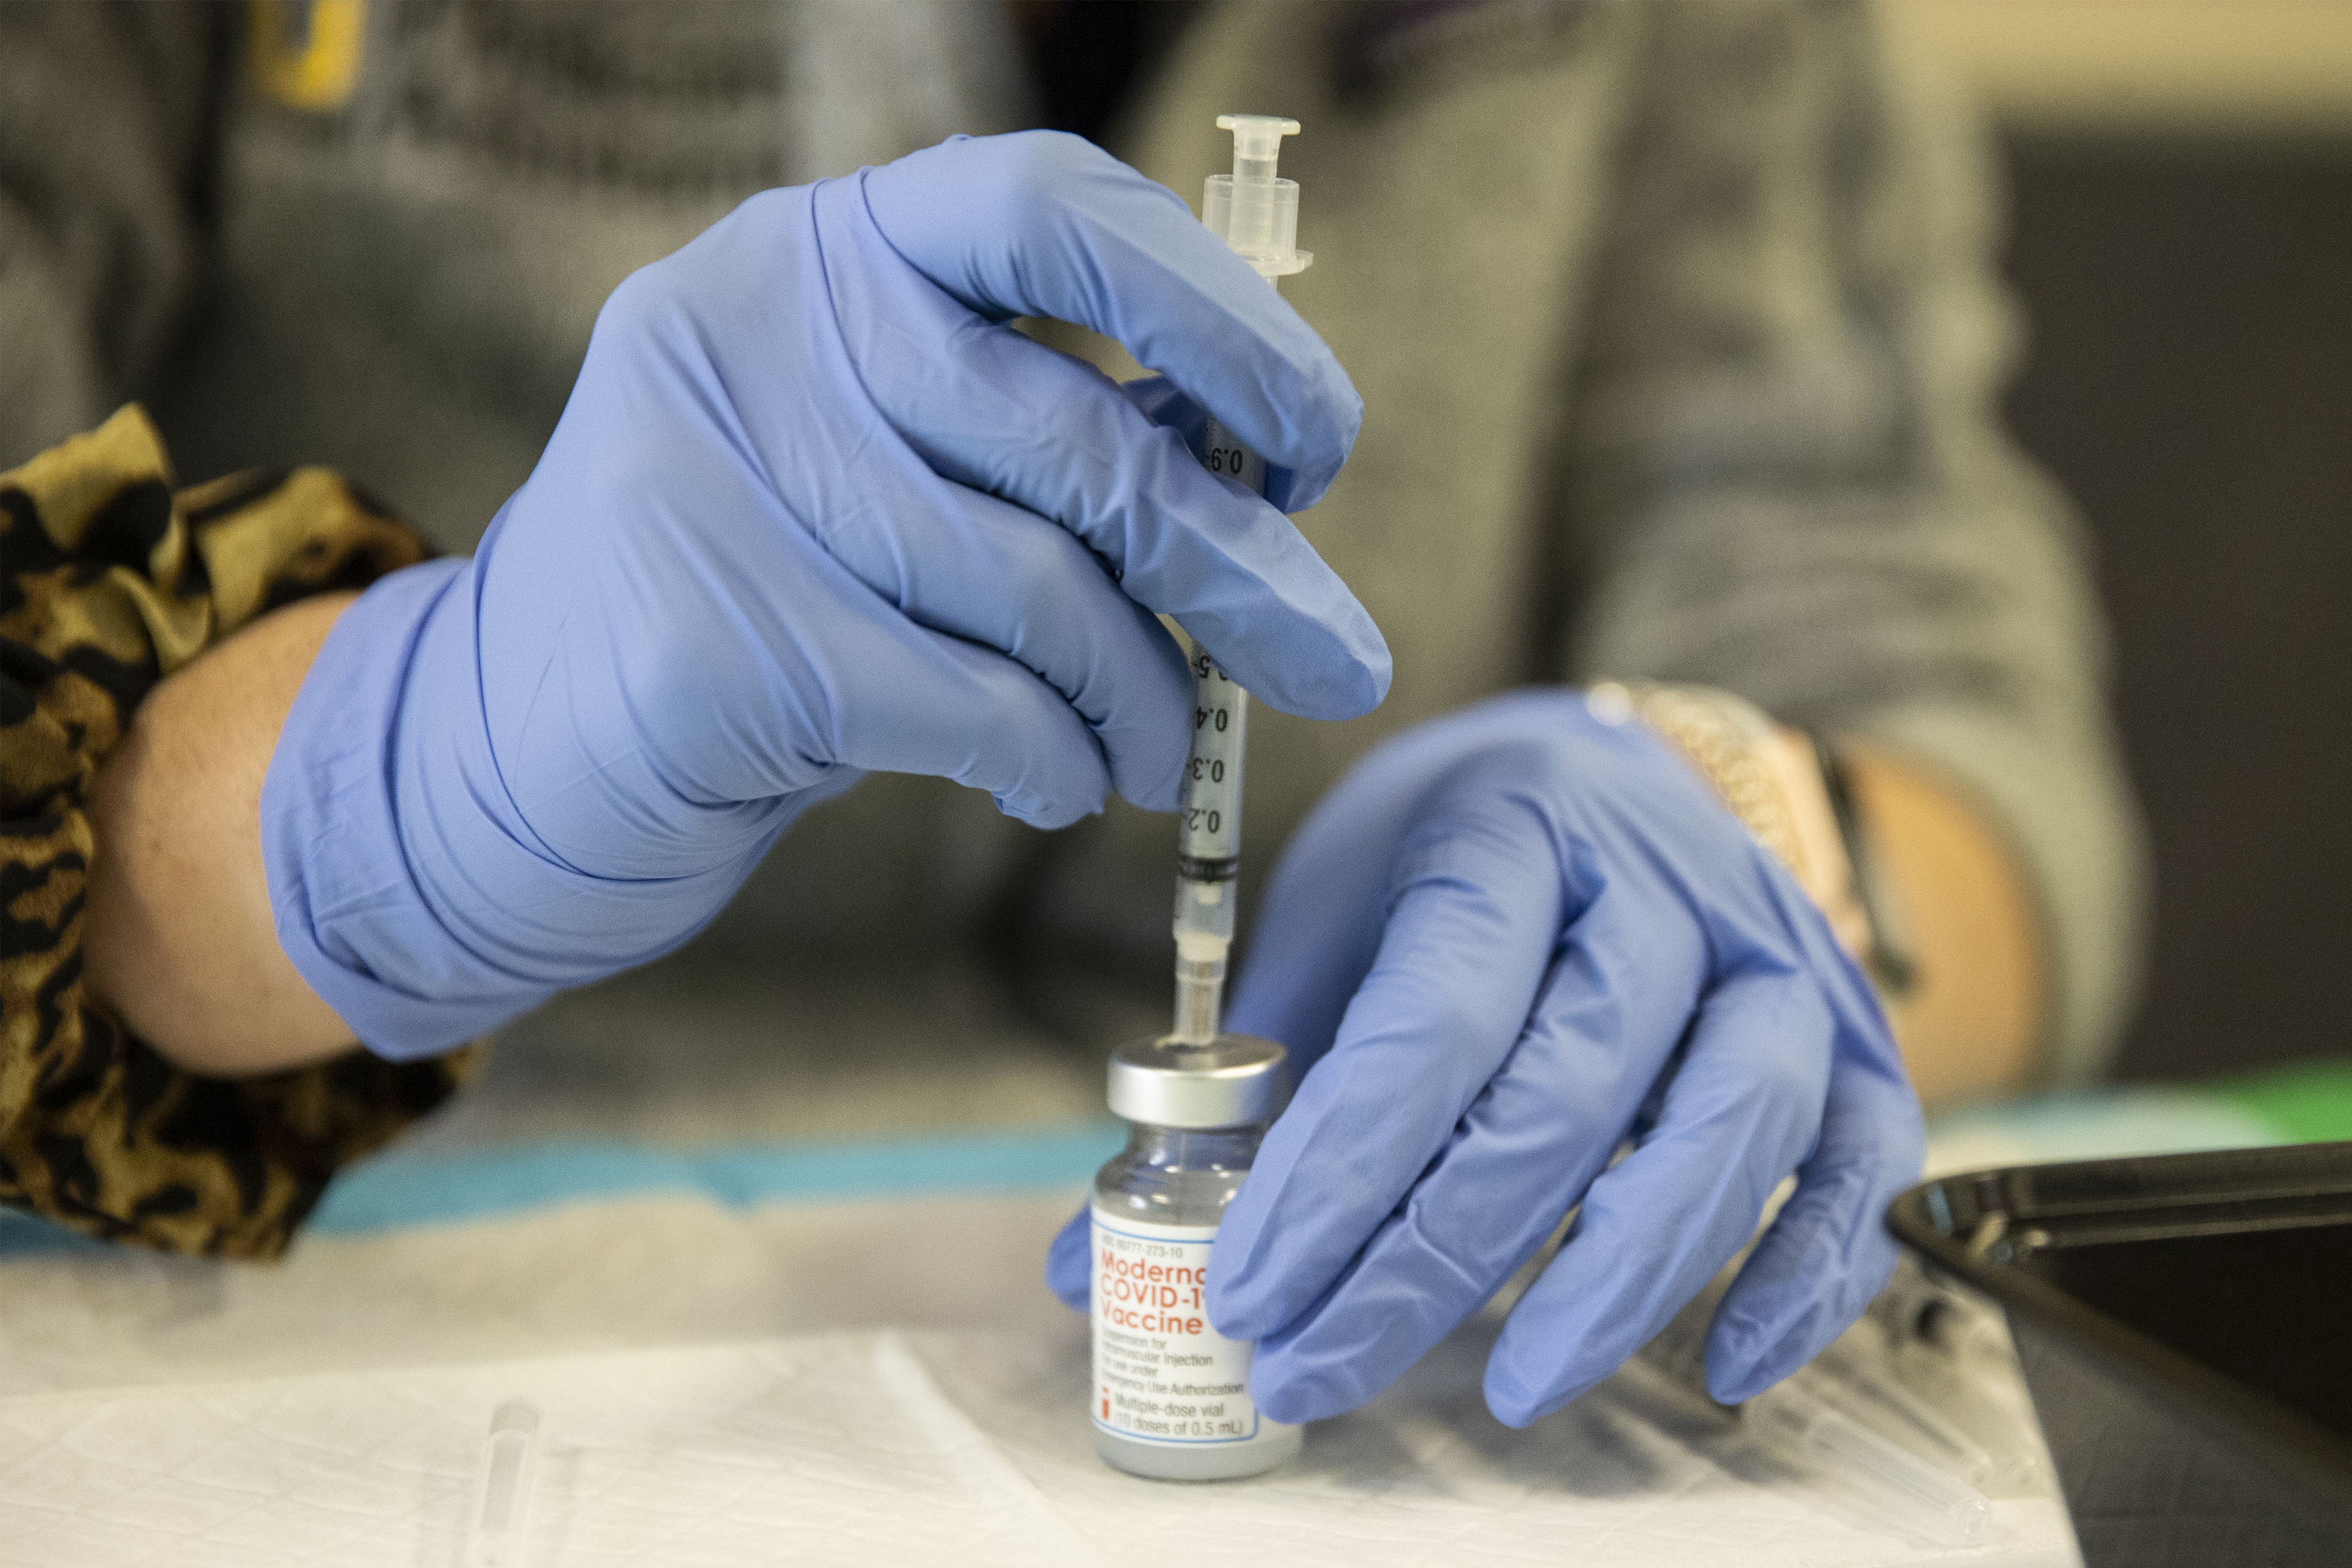 About 1/3 of adult Nevadans received at least 1 injection of the COVID-19 vaccine